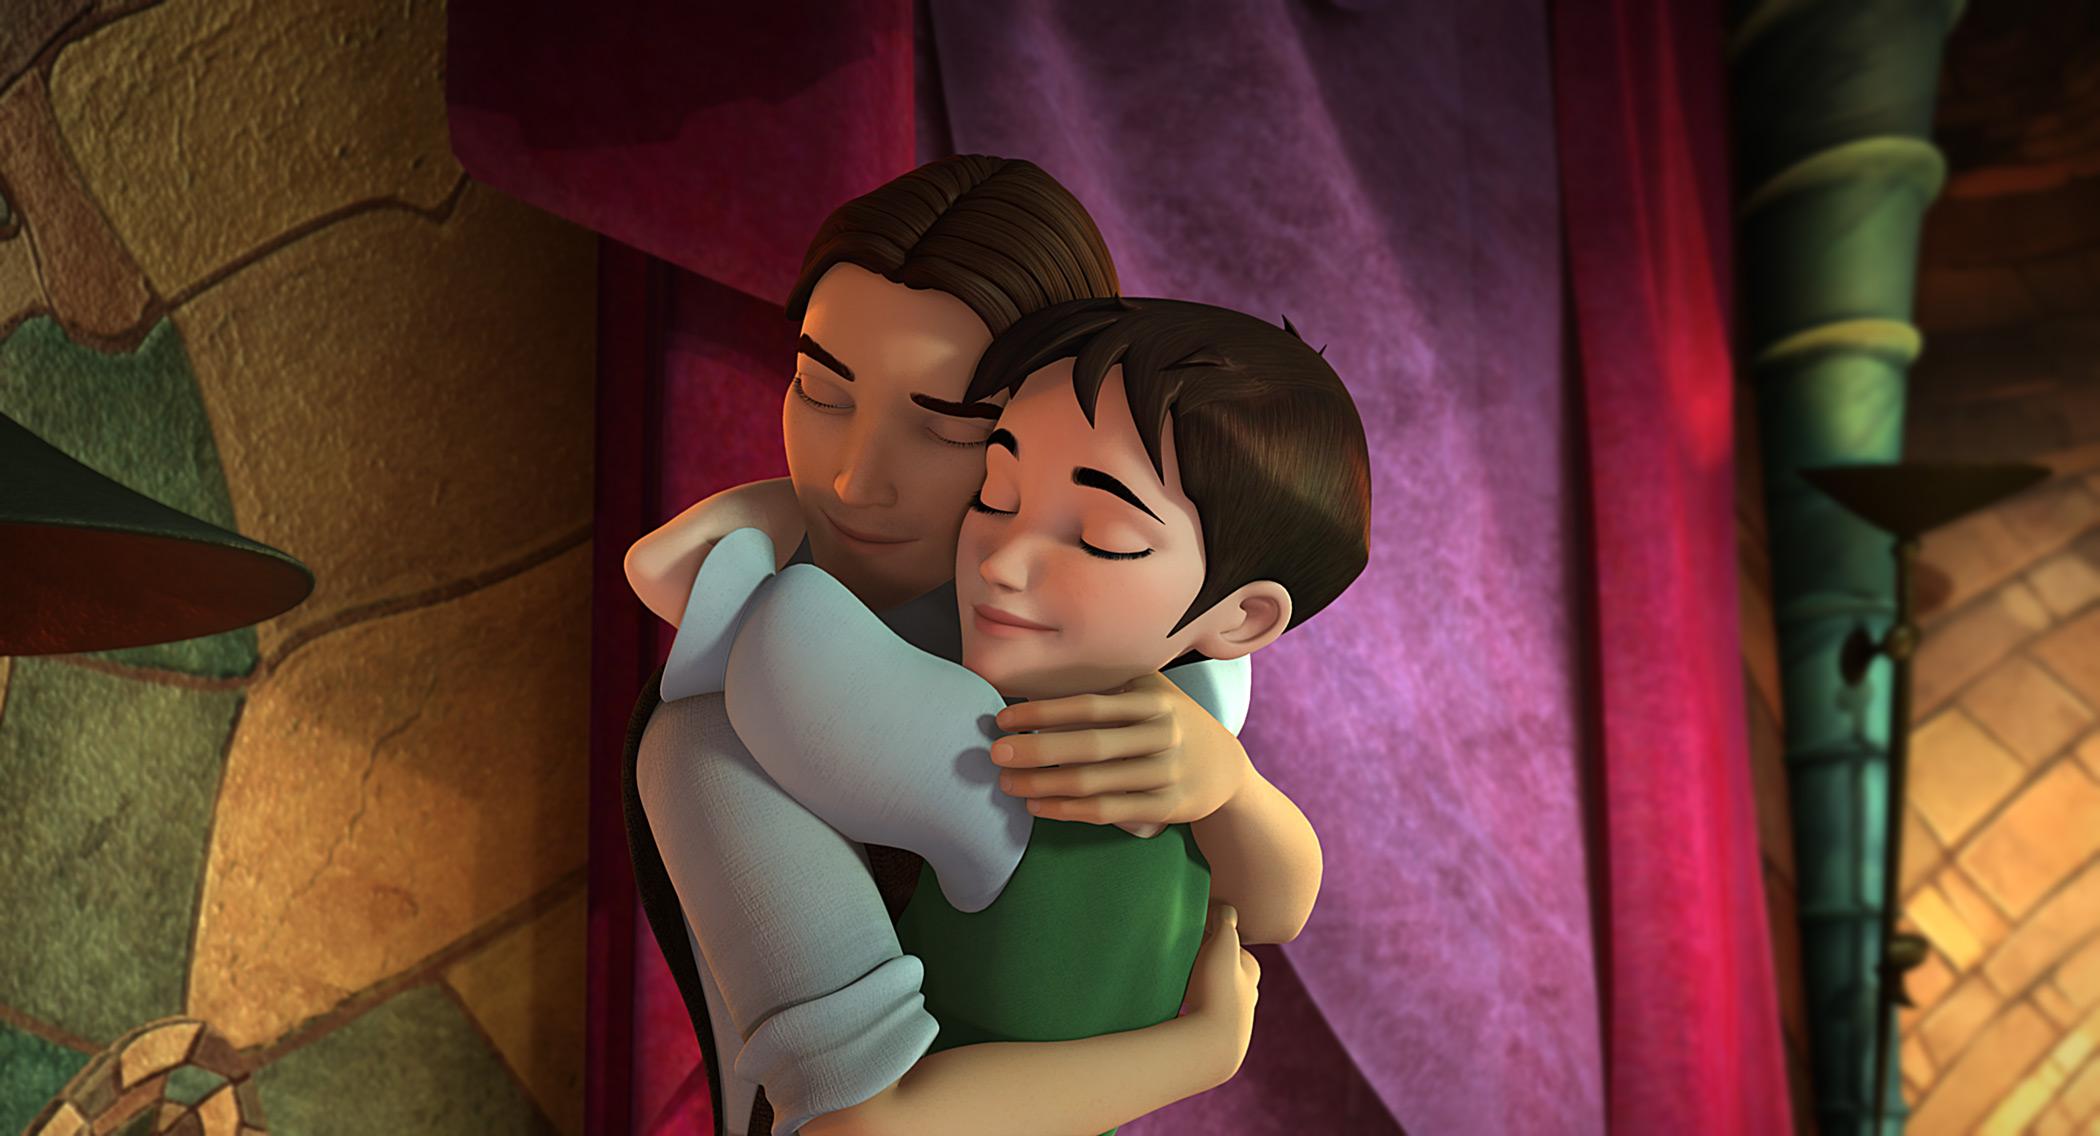 HD Wallpapers Rick (voiced by Freddie Prinze, Jr.) and Ella (voice by Sarah Michelle Gellar) in HAPPILY N'EVER AFTER.